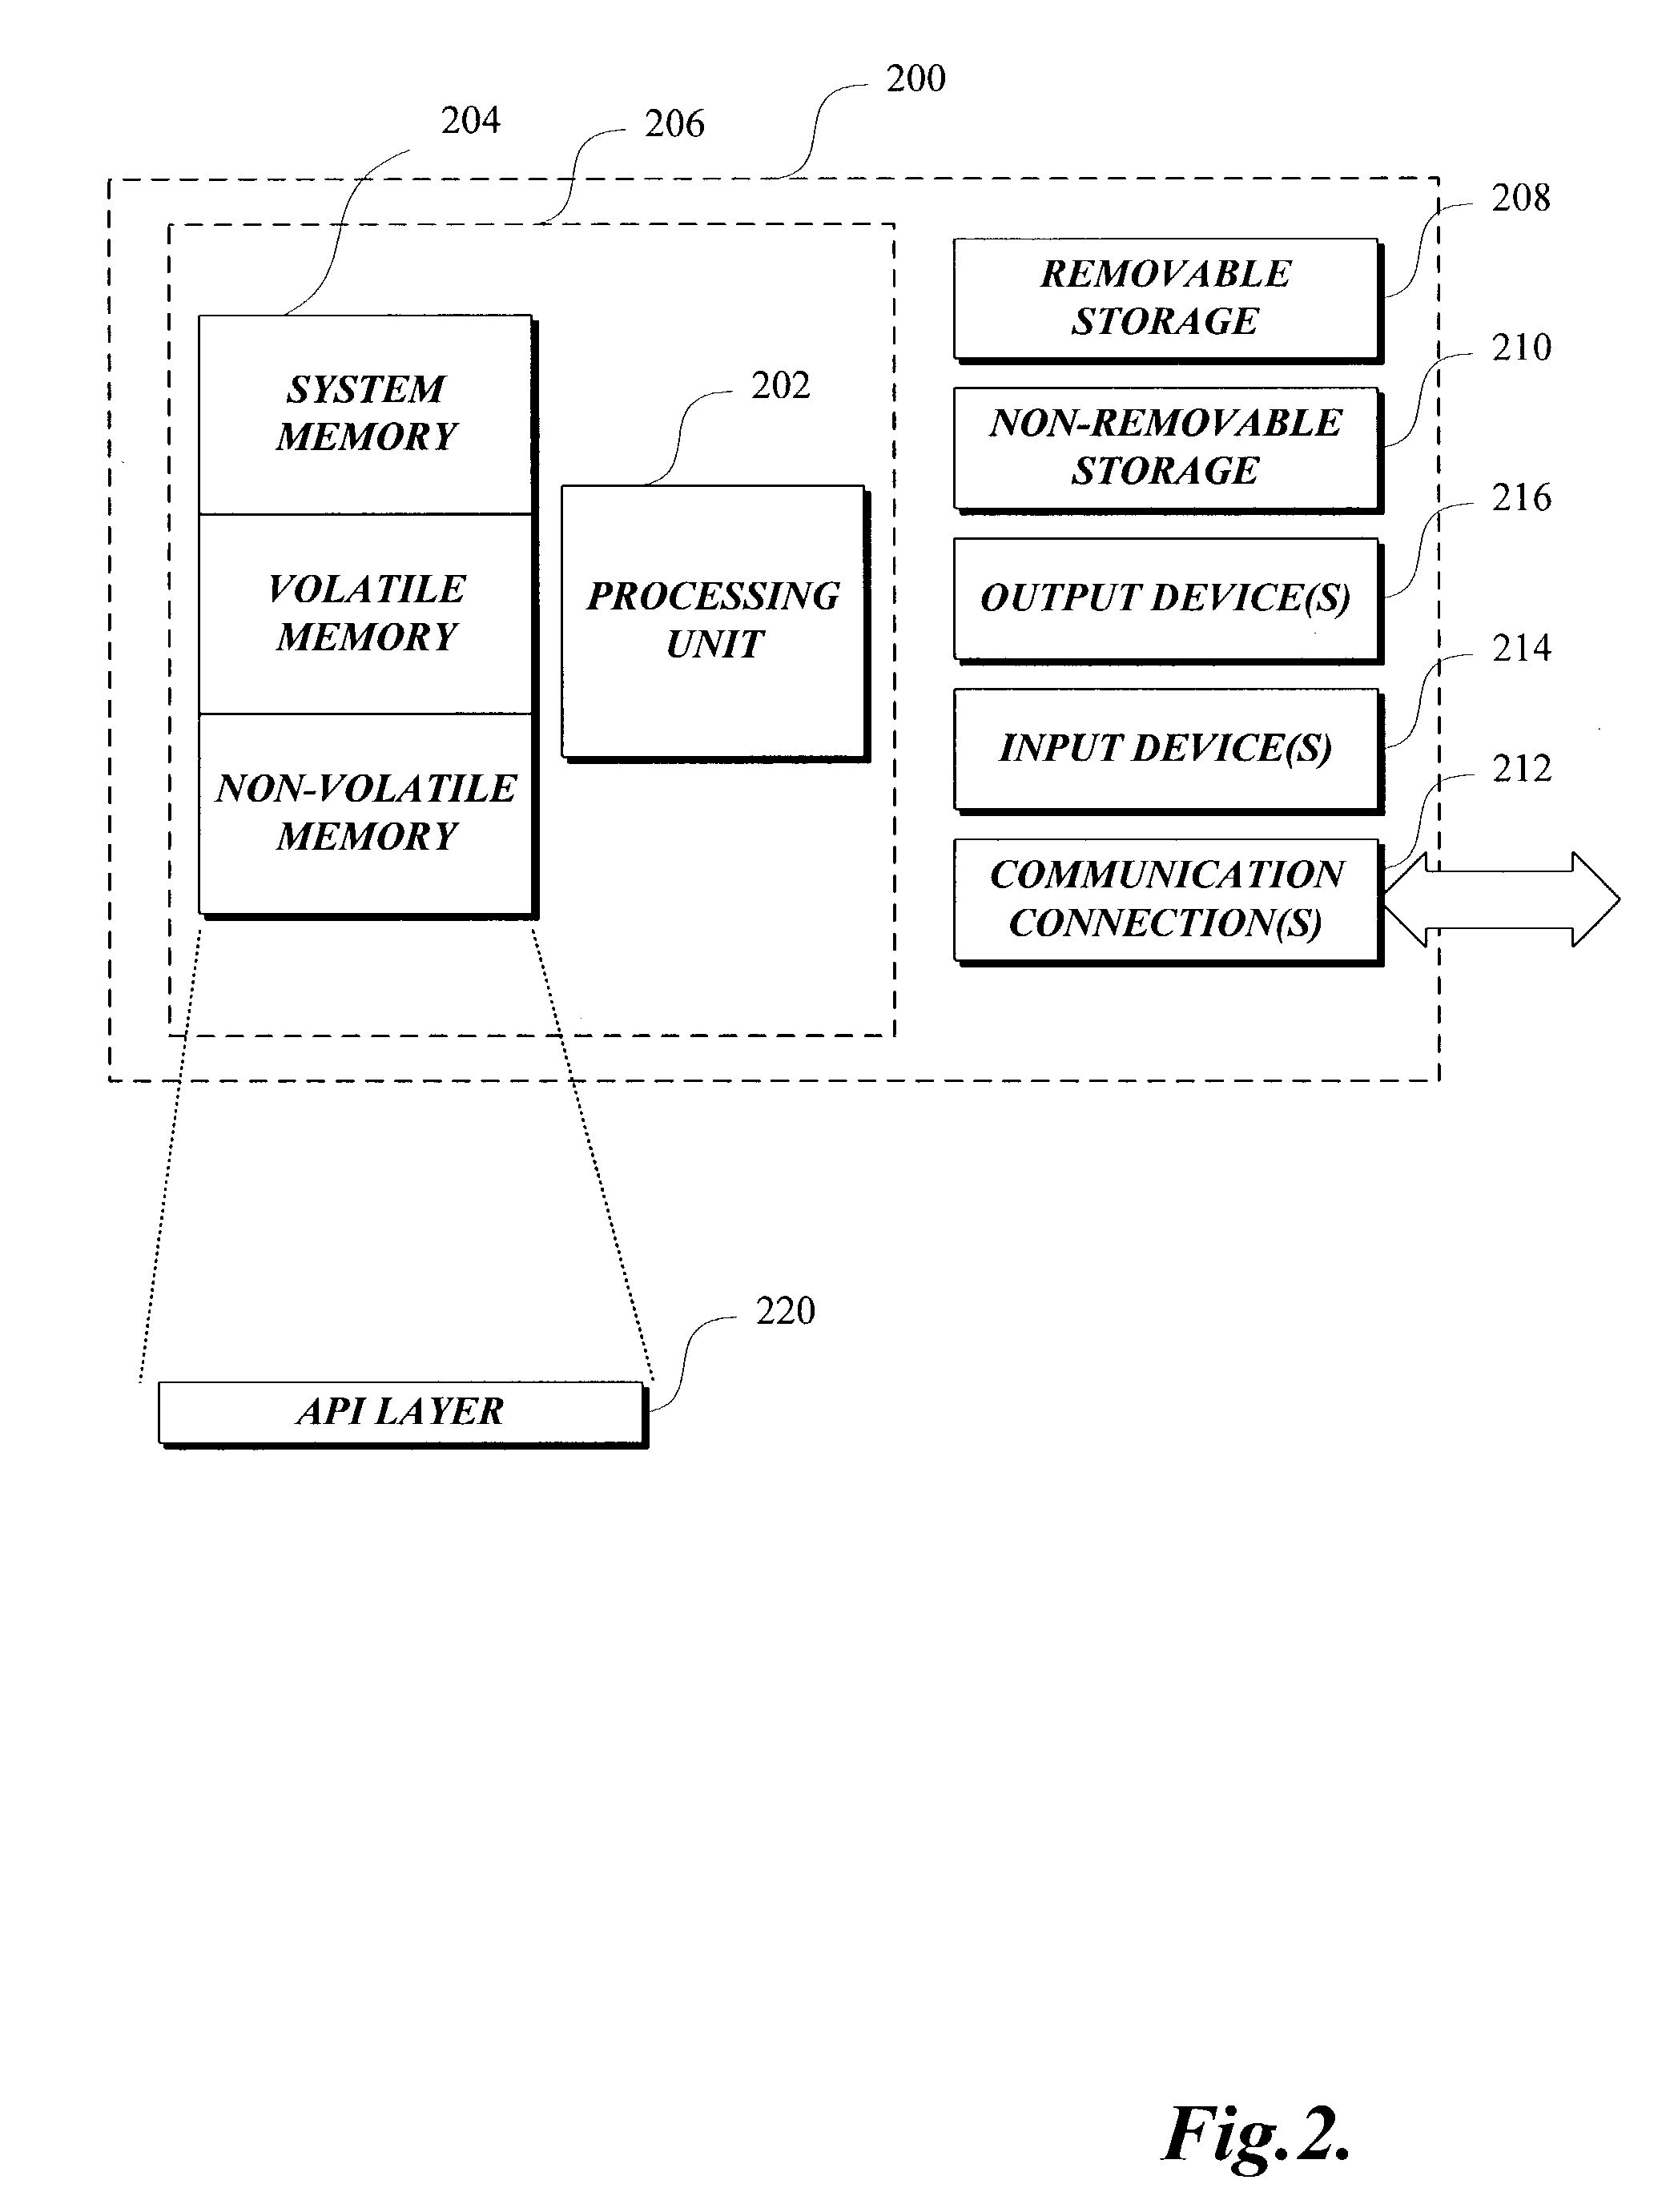 Address book clearinghouse interface system and method